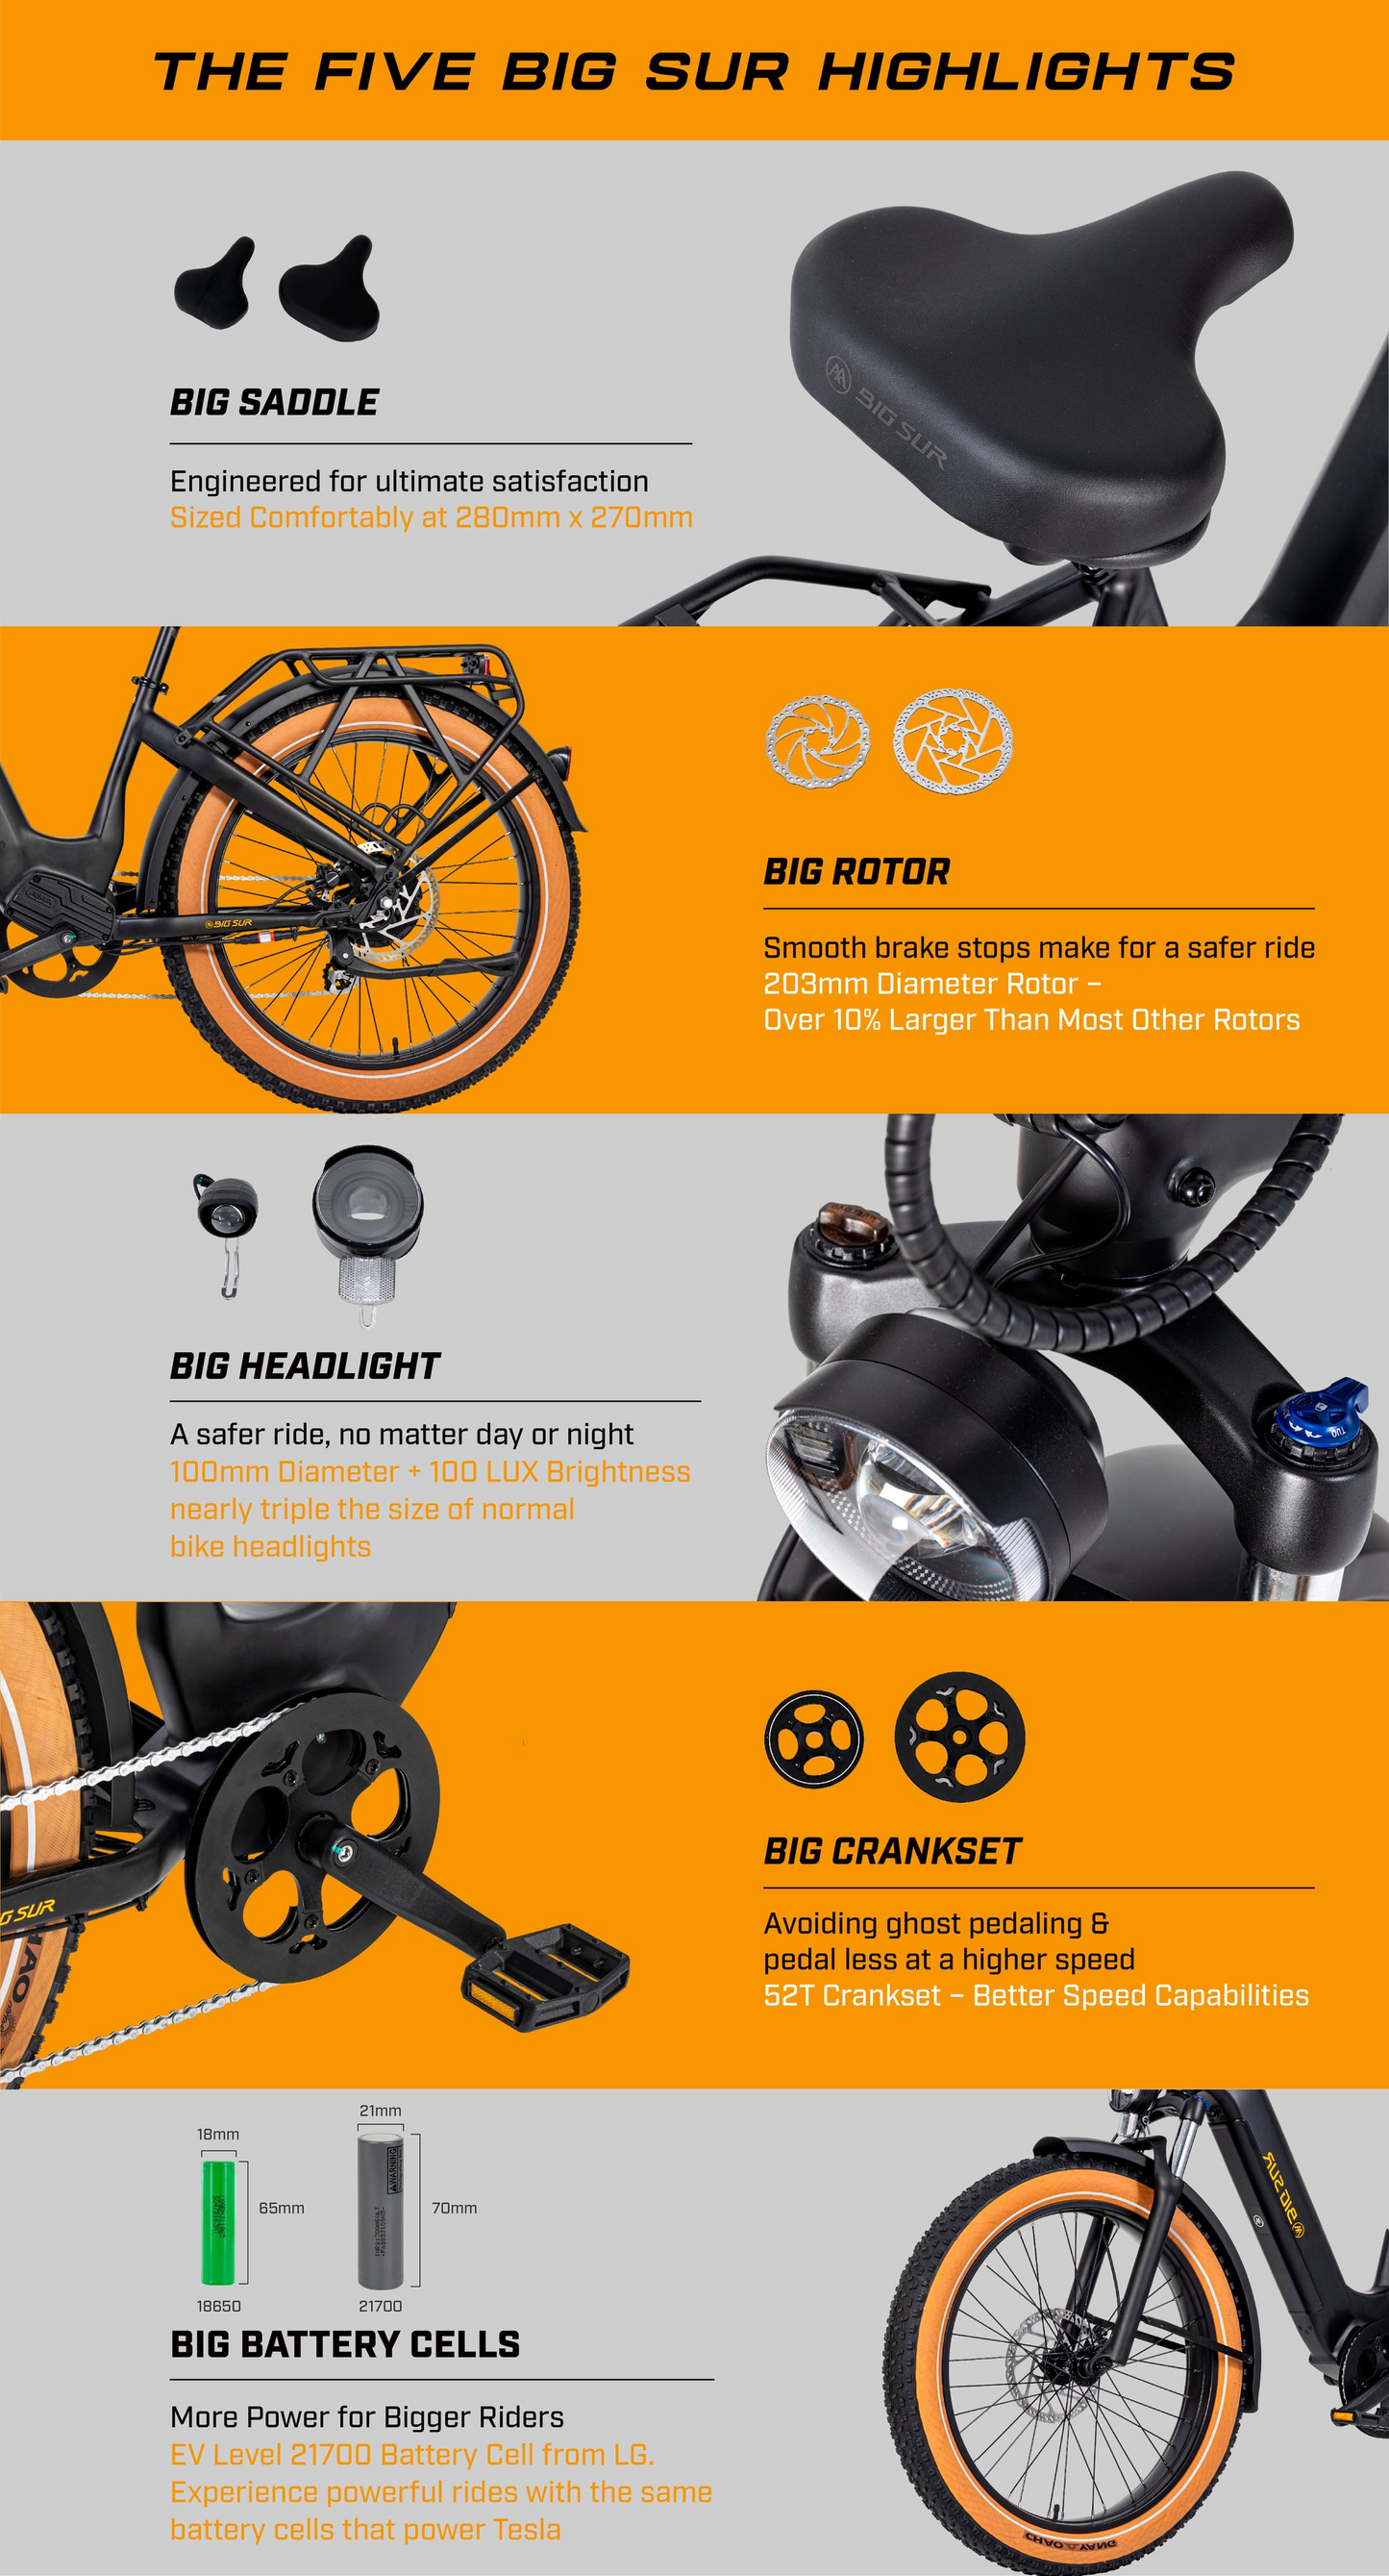 Infographic titled "The Five Big Sur Highlights" showcasing features of the AIMA - Big Sur Sport eBike, including a big saddle, big rotor, big headlight, big crankset, and big battery cells with descriptions and images. This compact powerhouse is available exclusively at Tampa Bay eBikes.